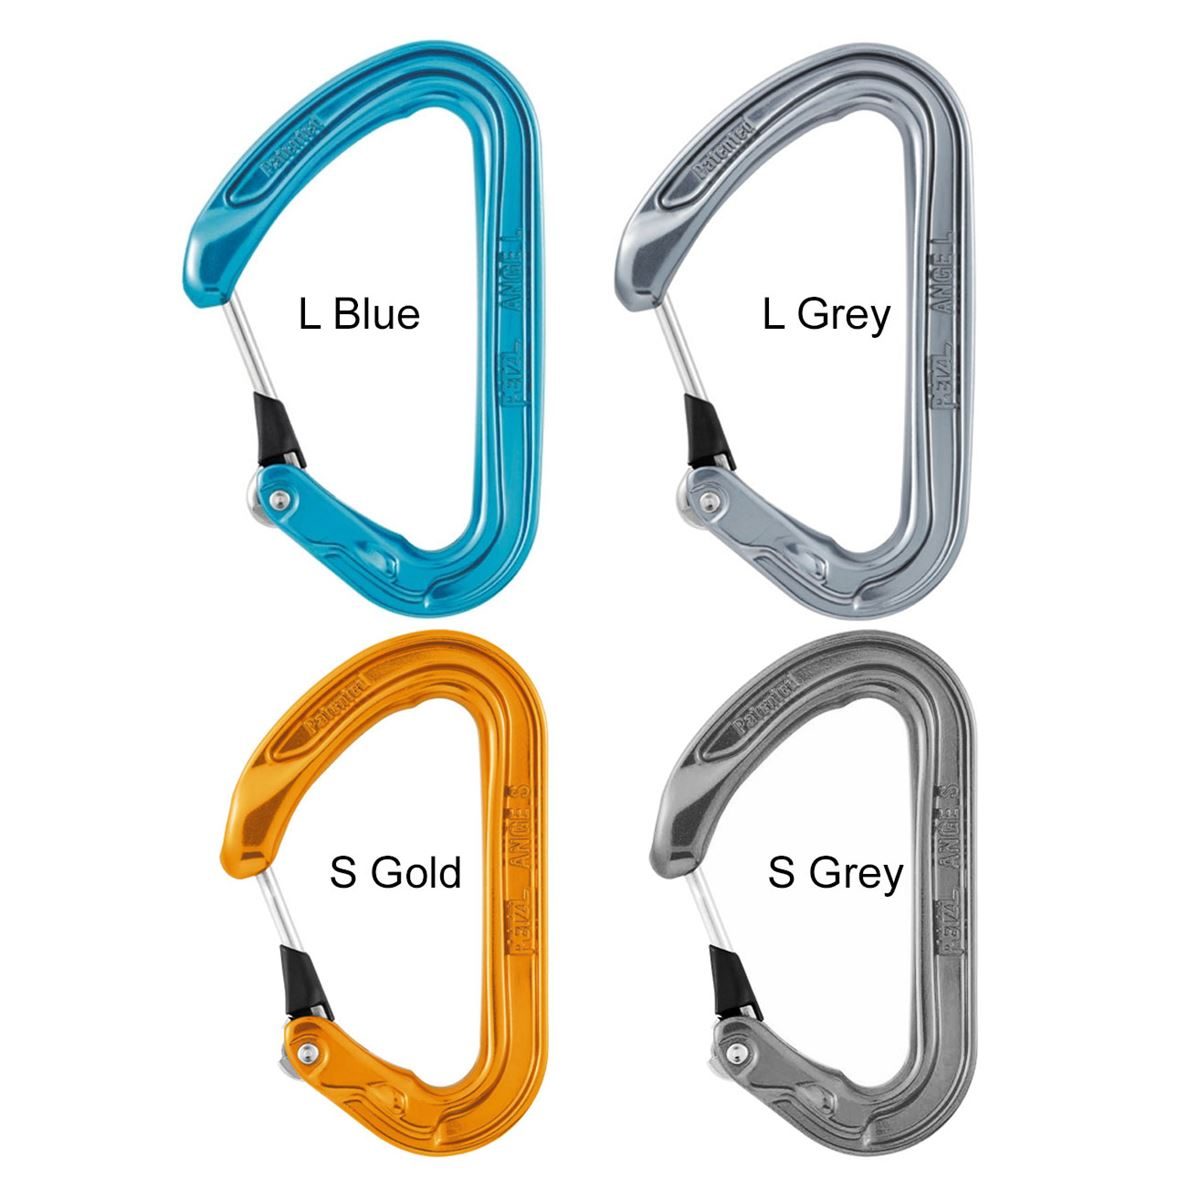 Petzl Ange S Carbiner Wire Gate, Grey